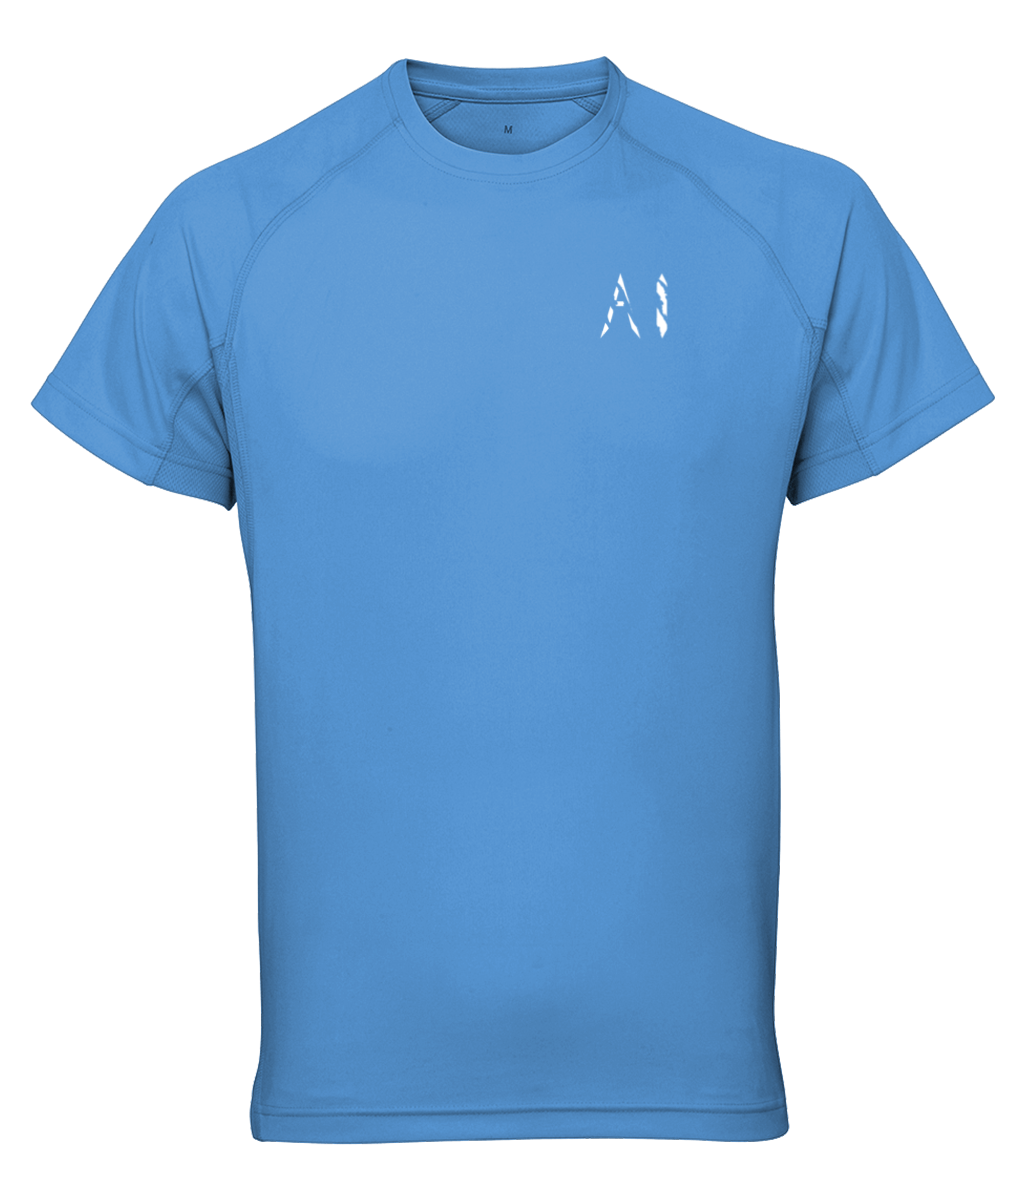 Mens cyan Athletic Performance Top with White AI logo on the left chest